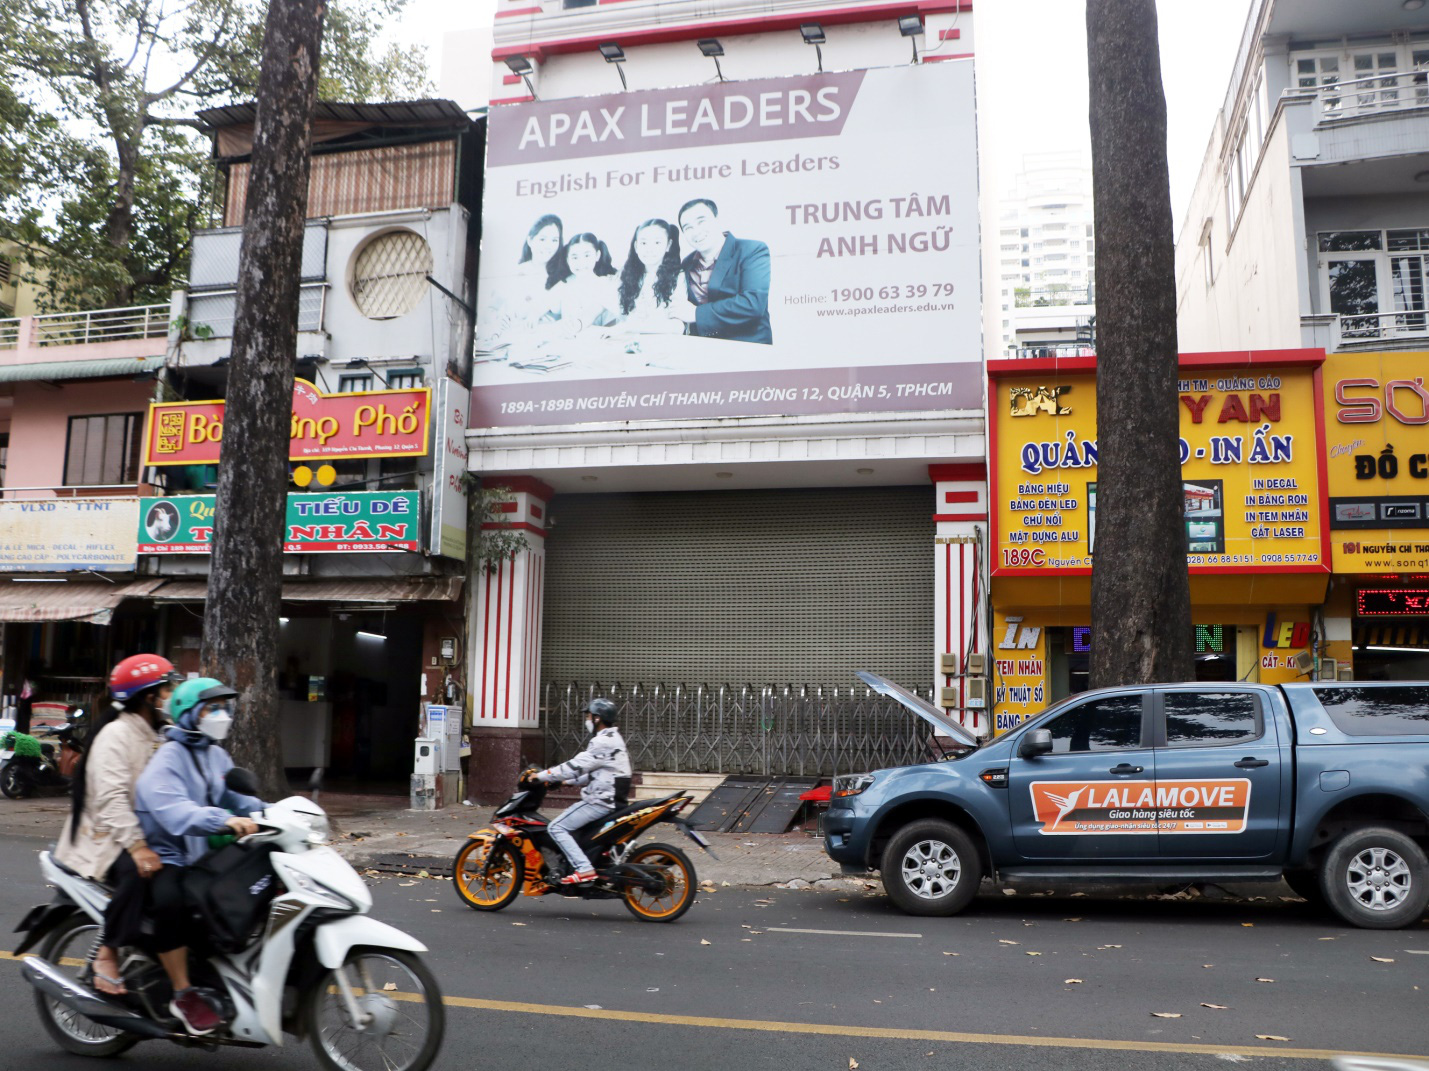 Scandal-struck APAX Leaders English center system announces reopening plan across Vietnam